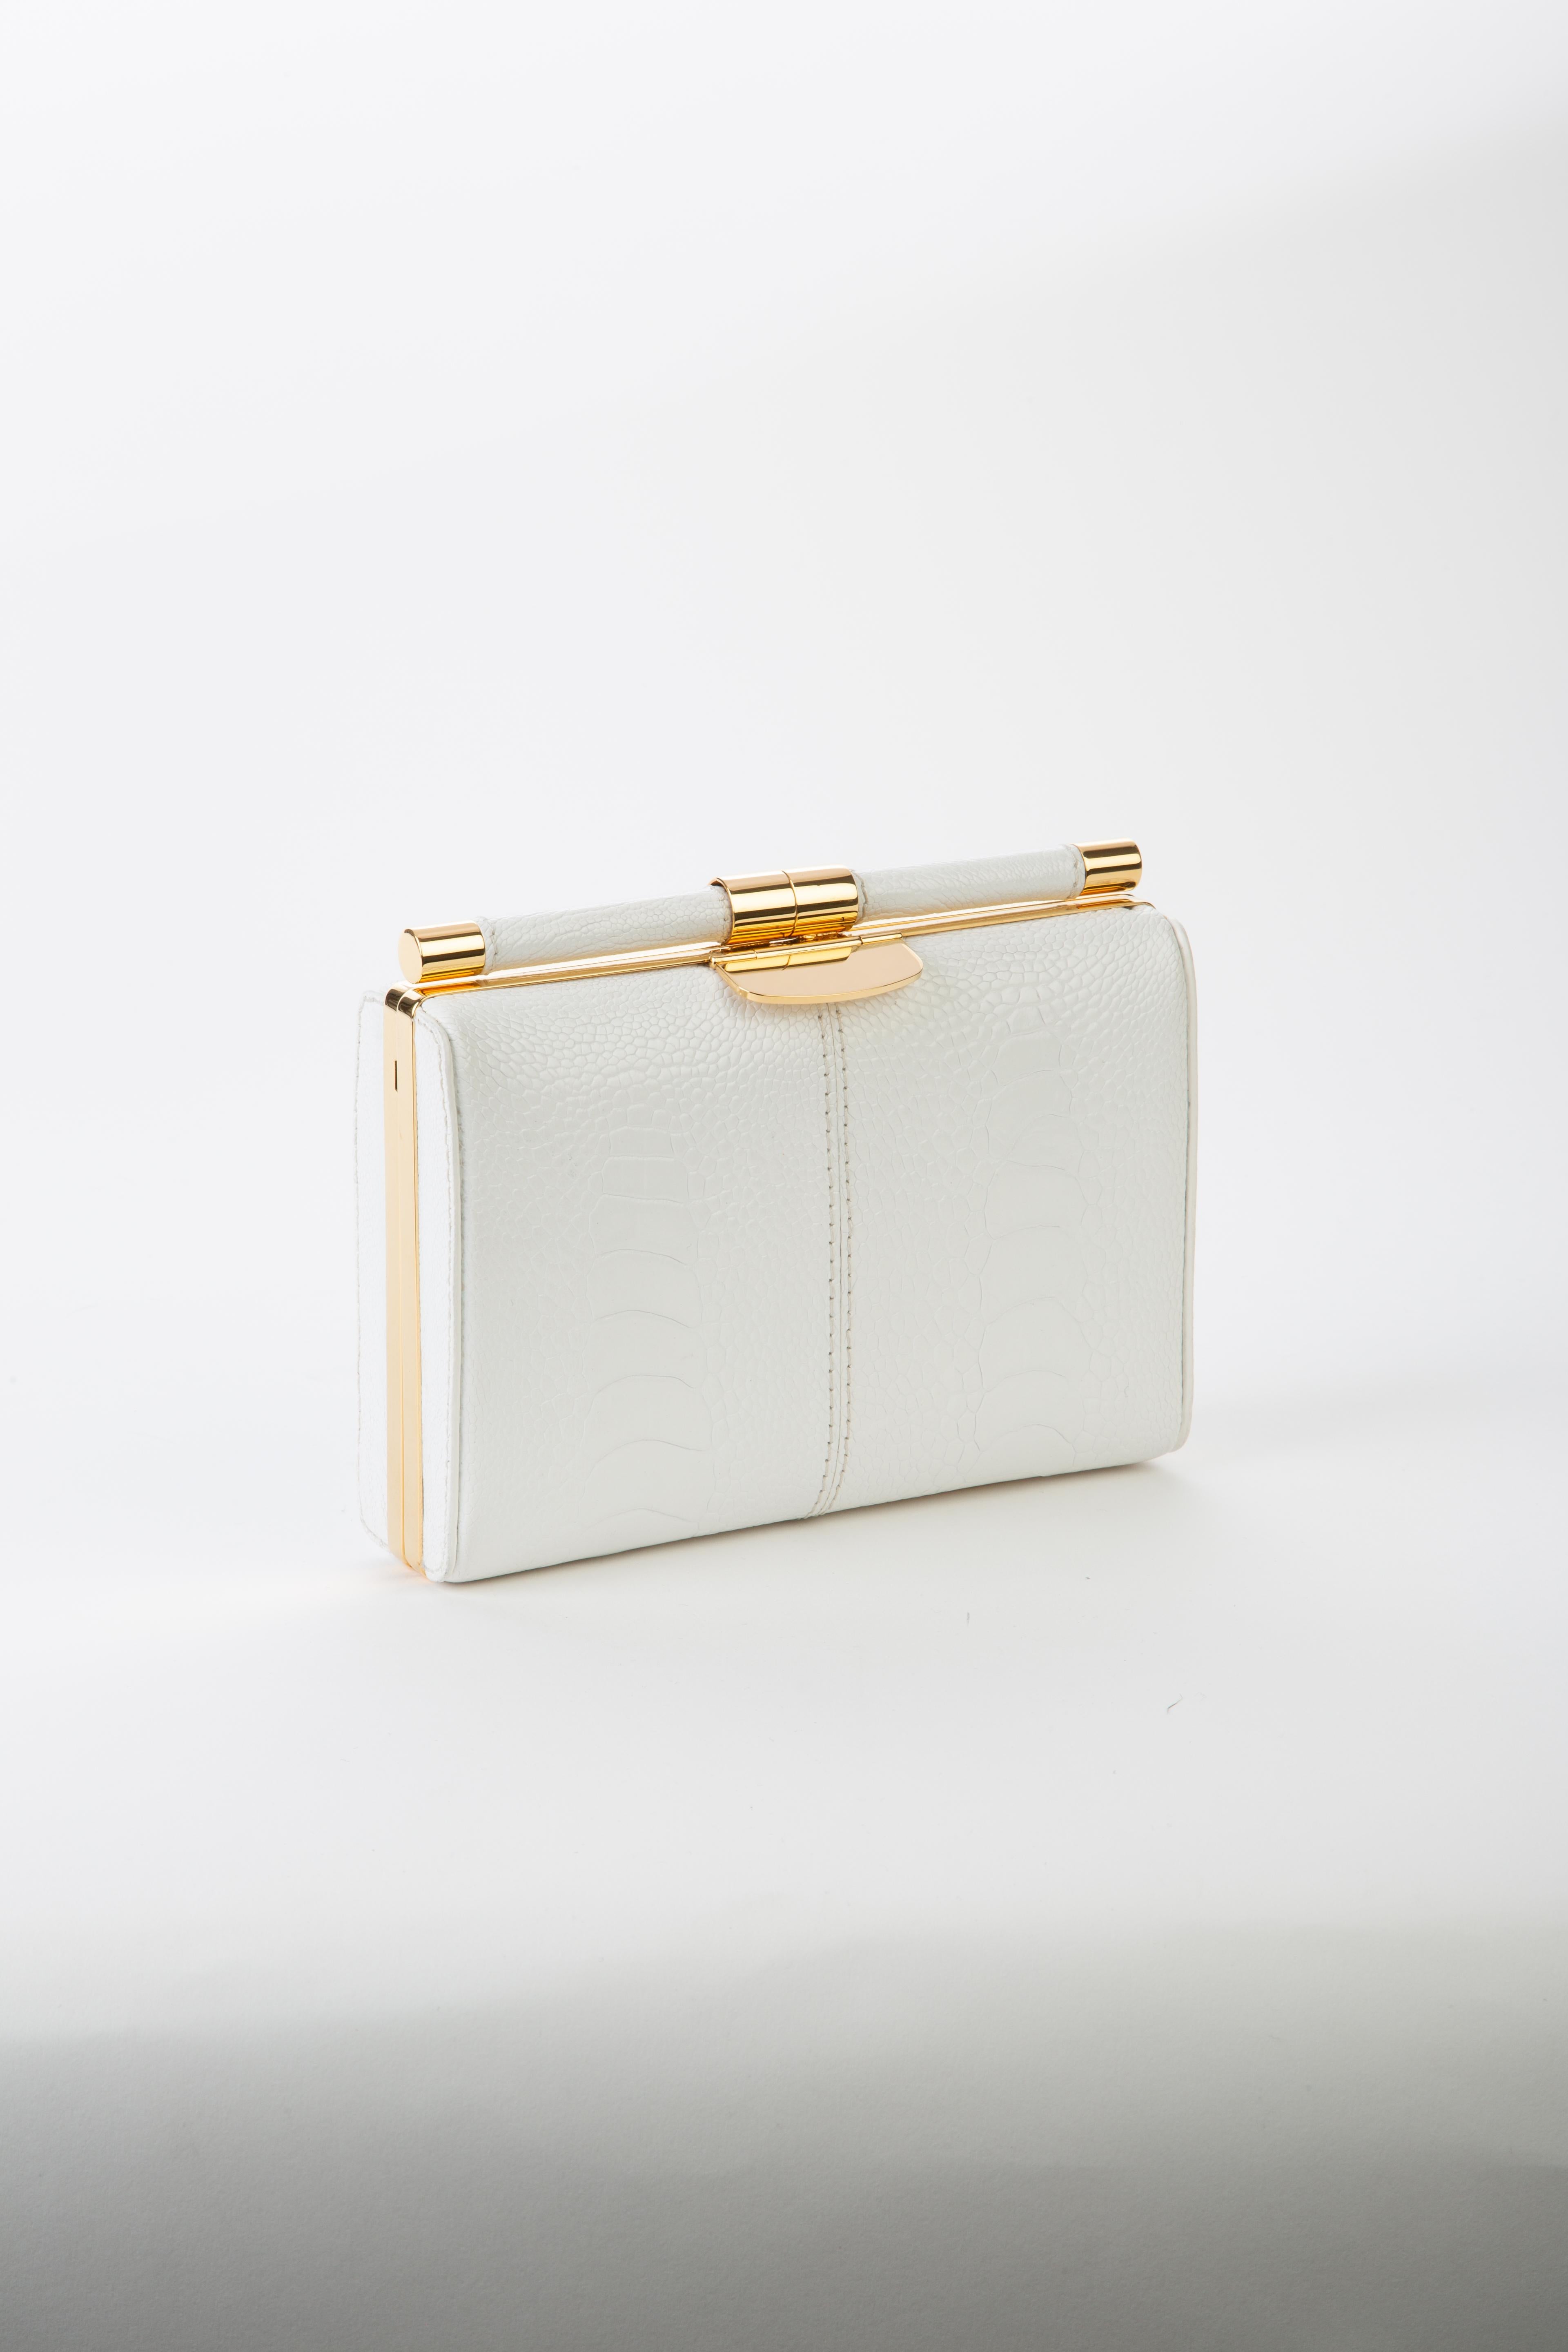 The Jamie Clutch is a structured square clutch with an optional cross-body chain and interior pocket. It features our slide-lock closure and signature Thayer blue satin lining. 

Size: Small
Hardware: Gold
Interior/Lining: Satin
Dimensions: 7.5” W x